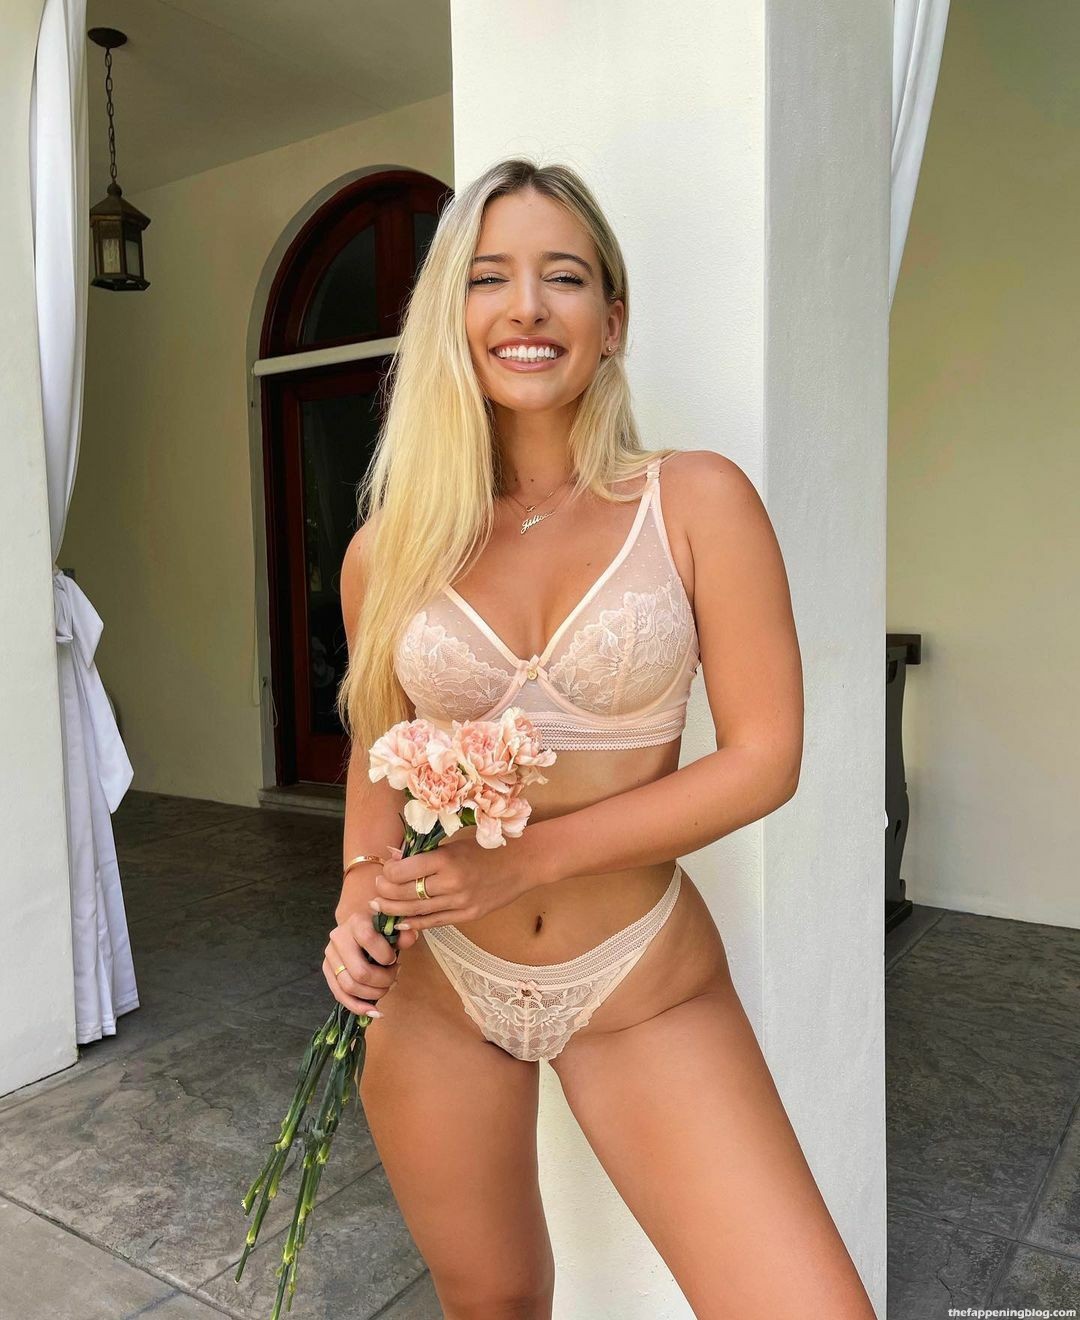 Jilissa Ann Zoltko Looks Hot in a Bra and Panties with Flowers (8 Photos)